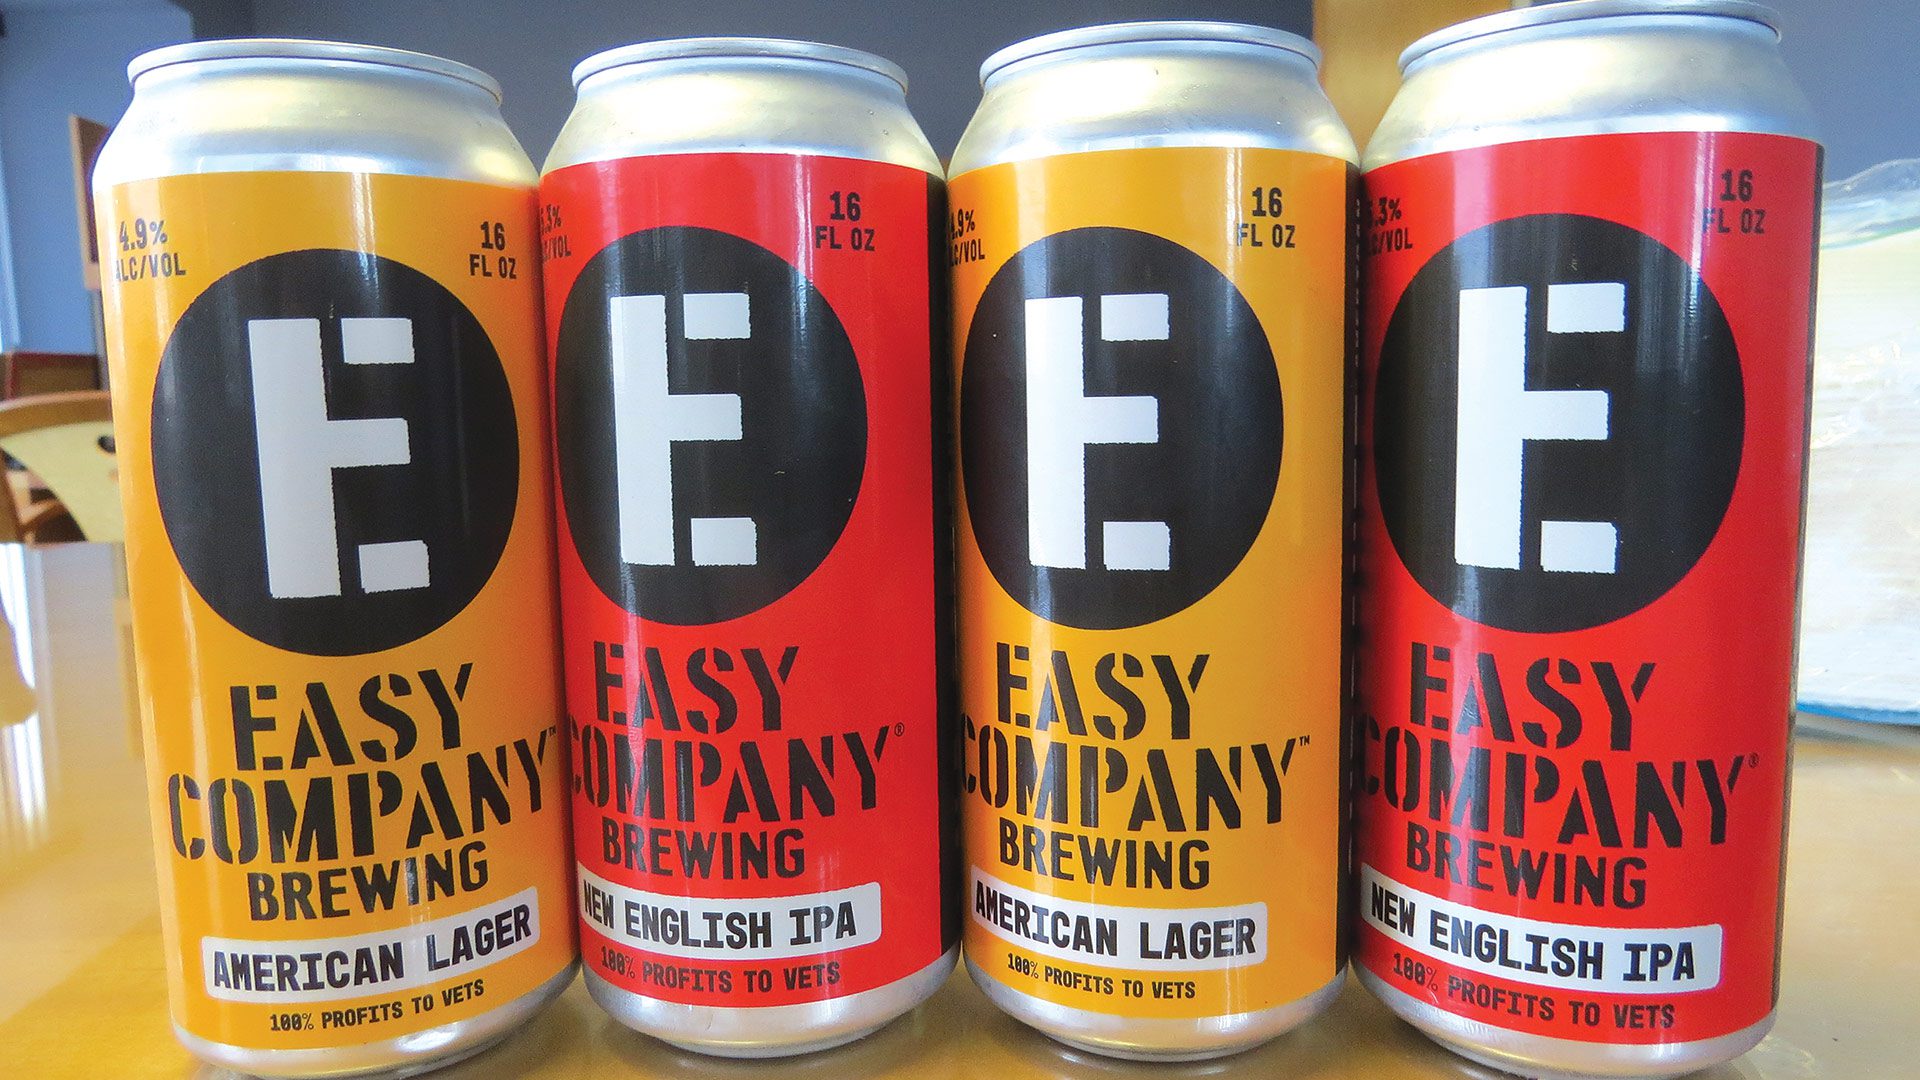 the brewery’s offerings follow the story of Easy Company